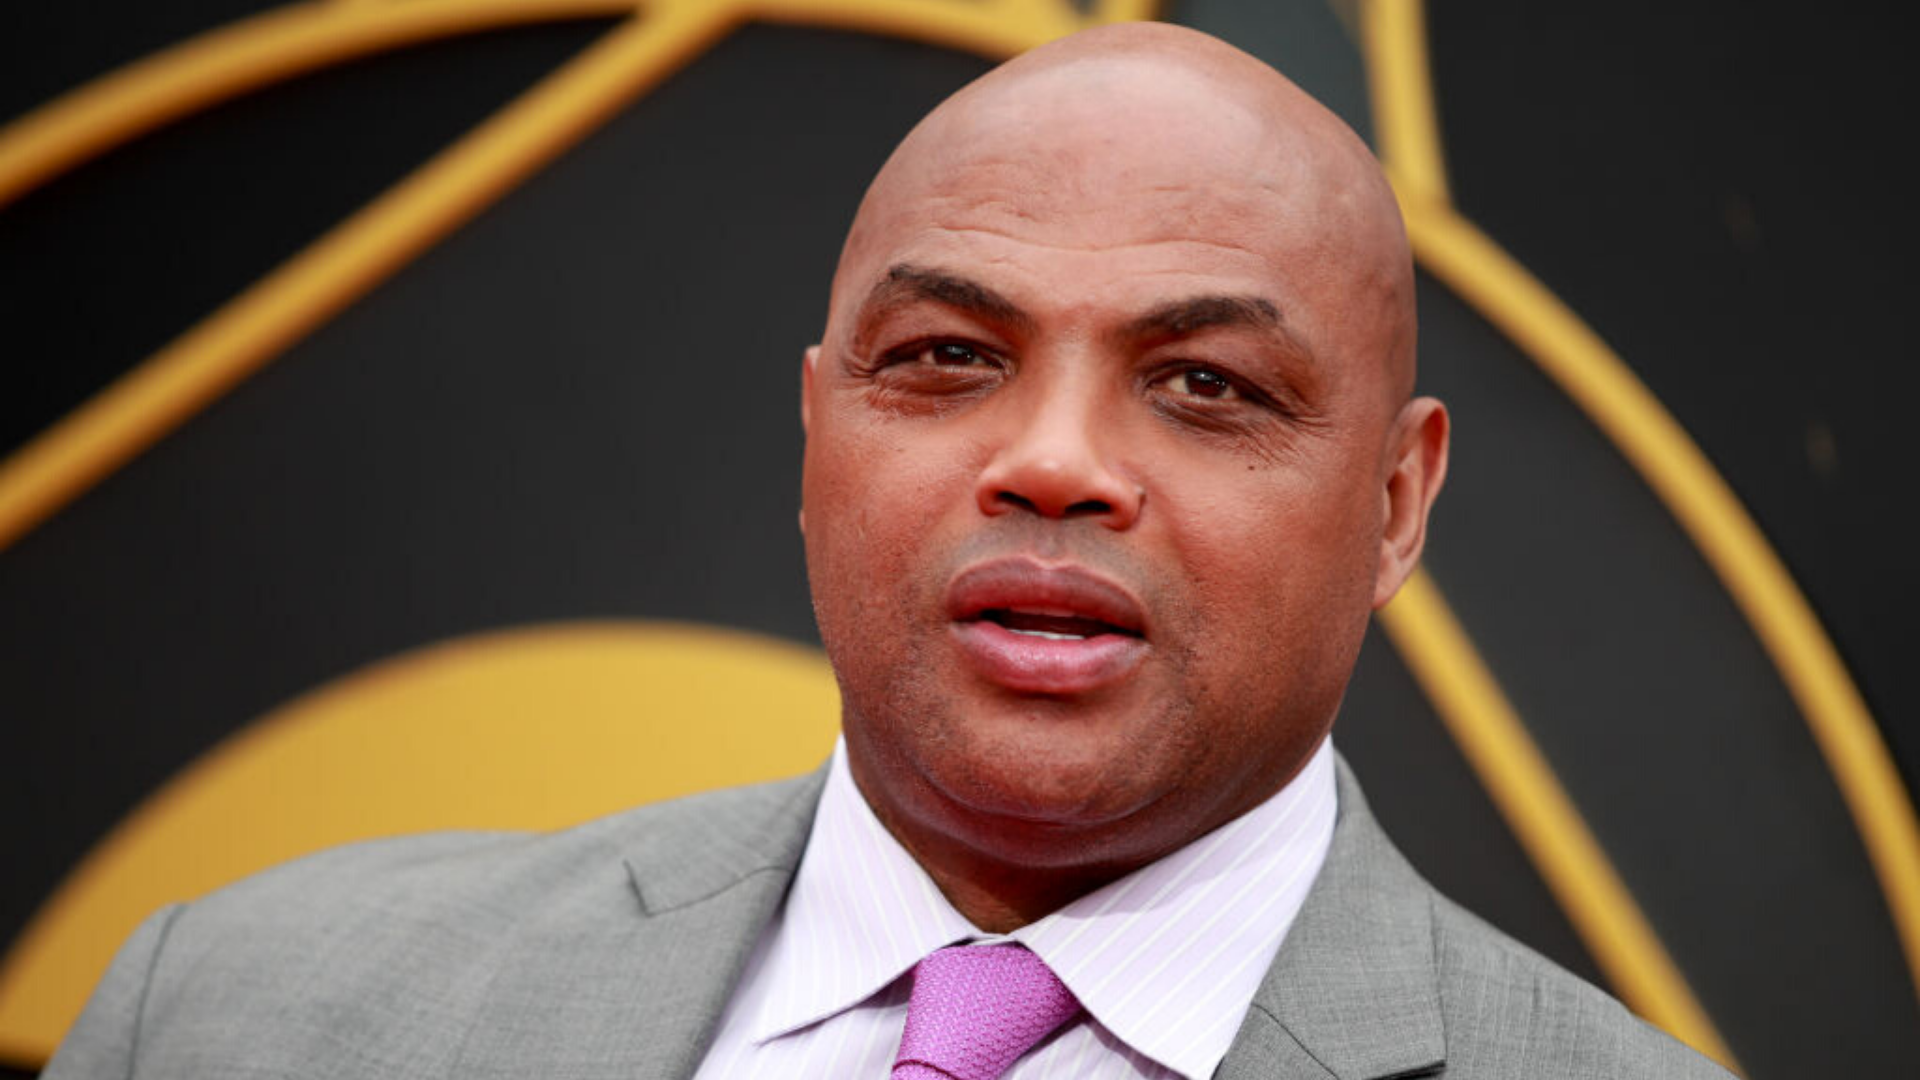 Charles Barkley Says The Bad Boy Pistons Tried To Hurt The Players: You  Had To Call